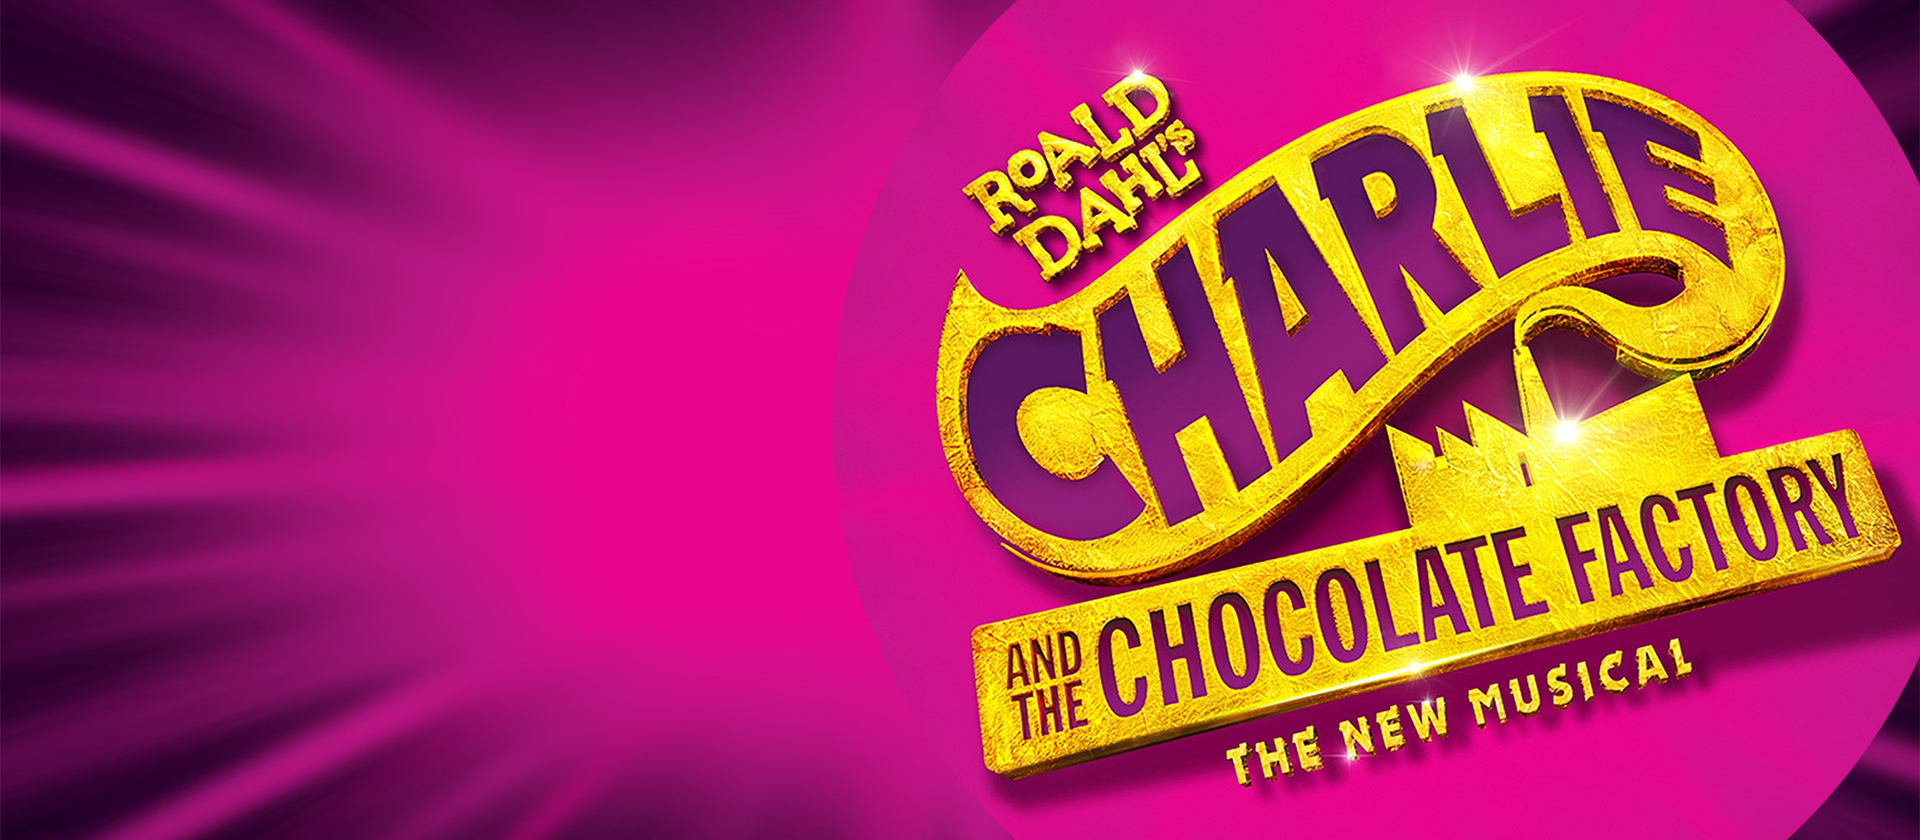 LCT.1202-web-banner-Charlie-Chocolate-Factory.png